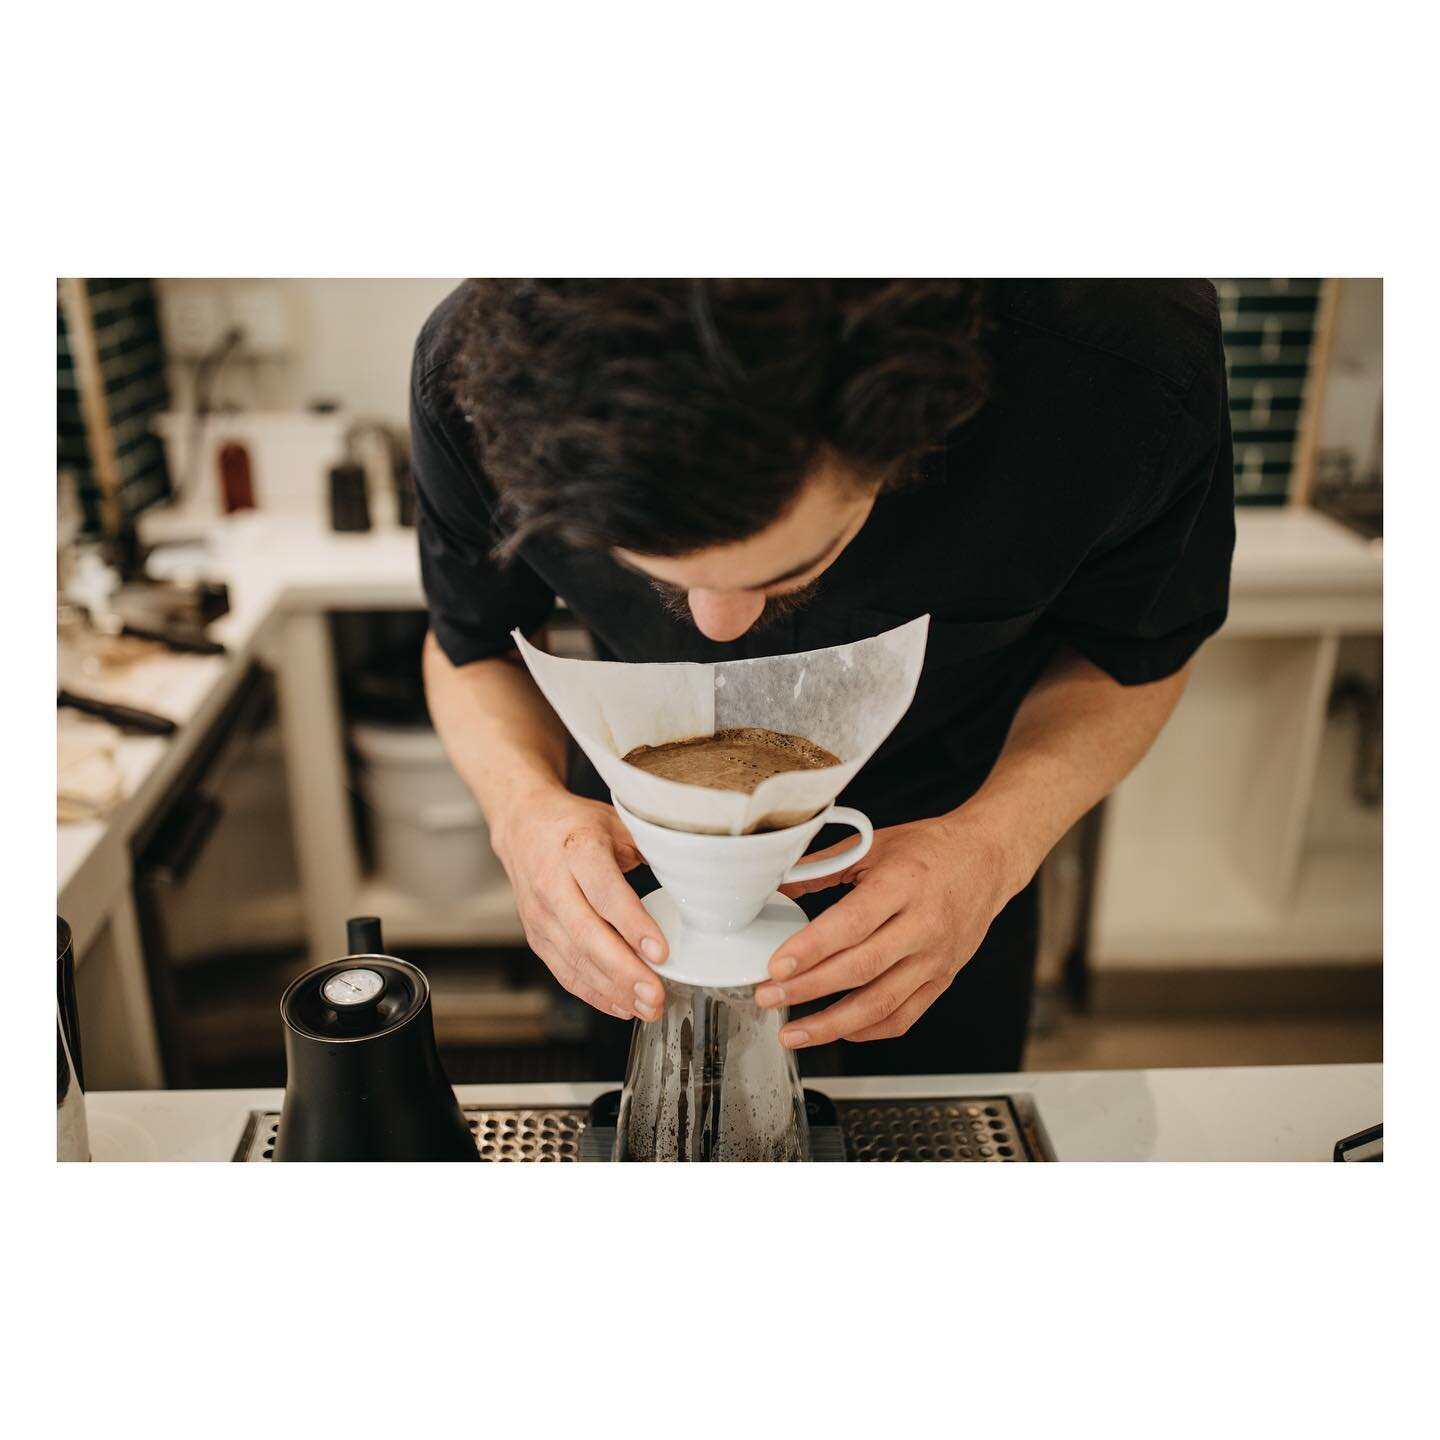 ✨ Freshly Ground Coffee ✨ is the perfect start to any morning. If you need a brew recipe to start your day, we got you:

16g freshly ground coffee for one cup
✨ double all #&rsquo;s for two cups ✨

1st Pour: 50ml
@whereisscottrao spin 5 times

@ 25 s